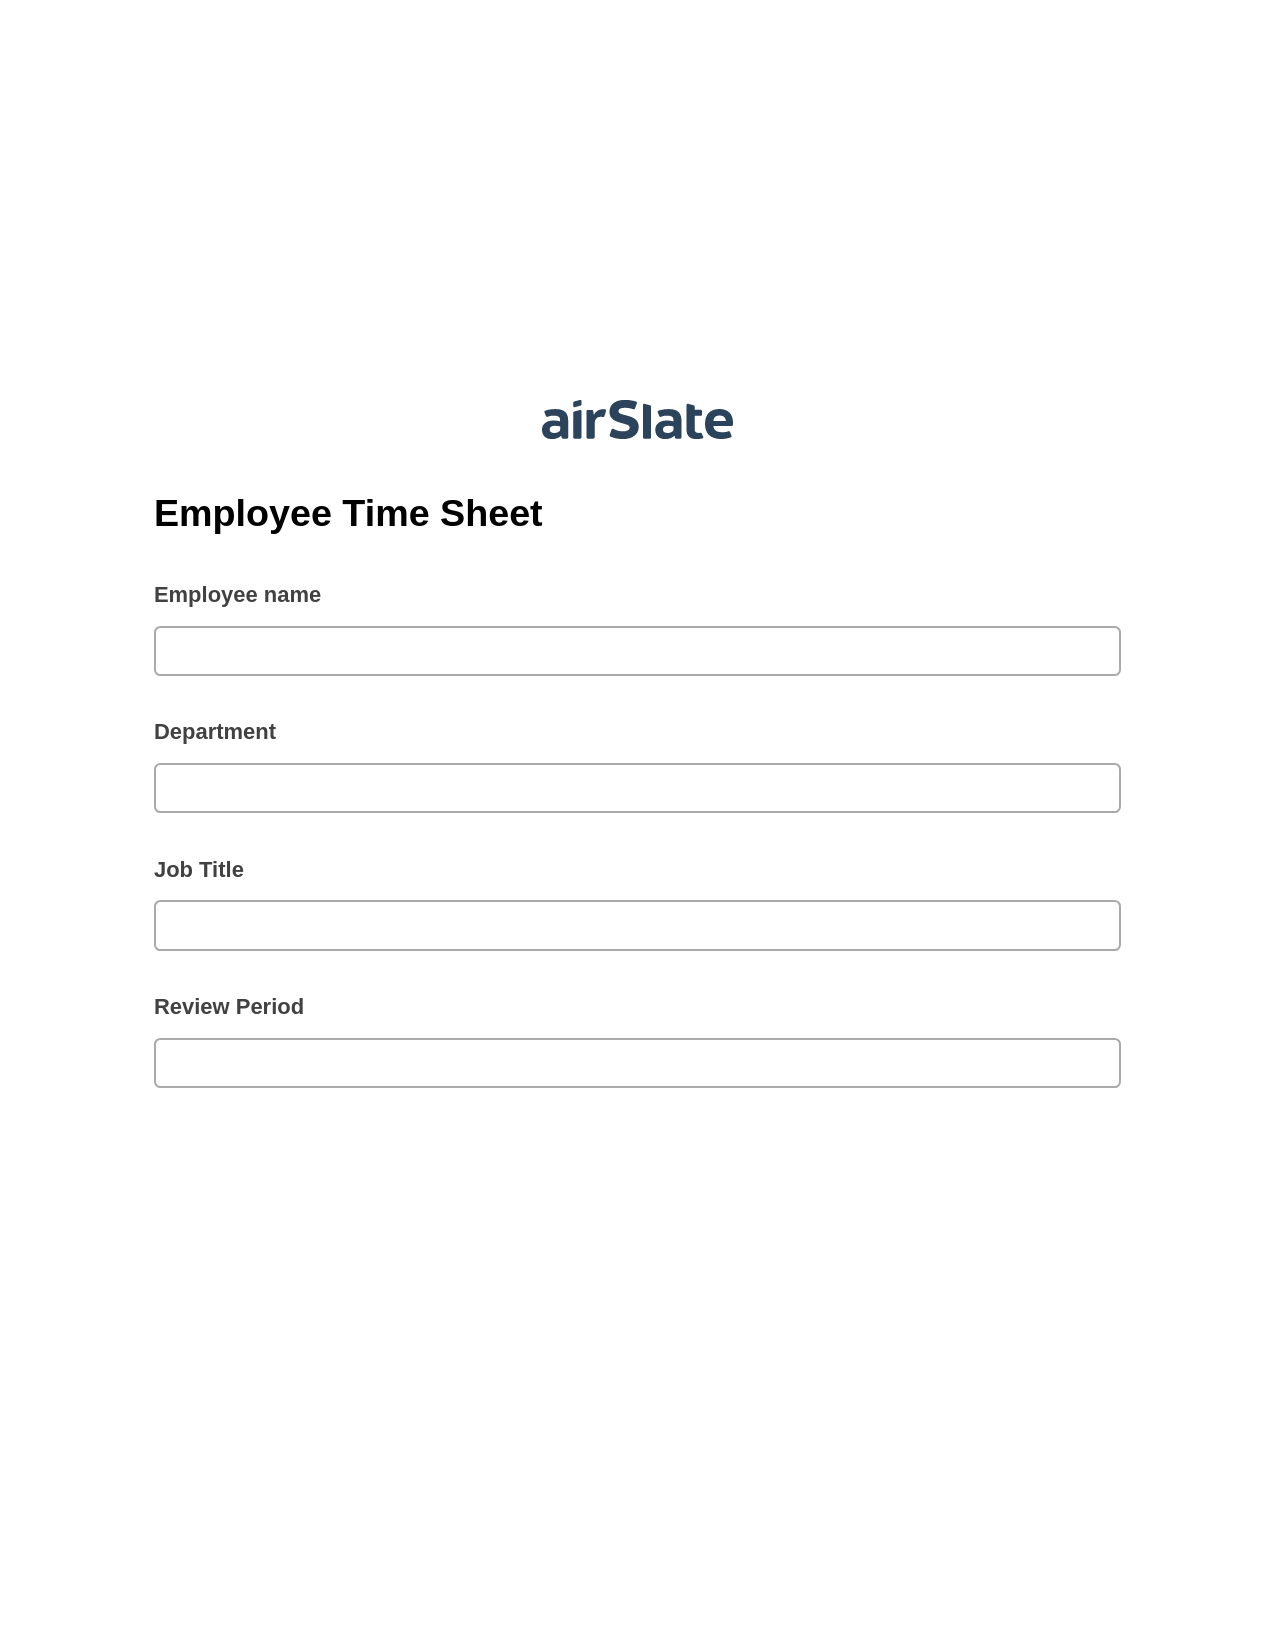 Multirole Employee Time Sheet Pre-fill Document Bot, Create slate addon, Export to Excel 365 Bot